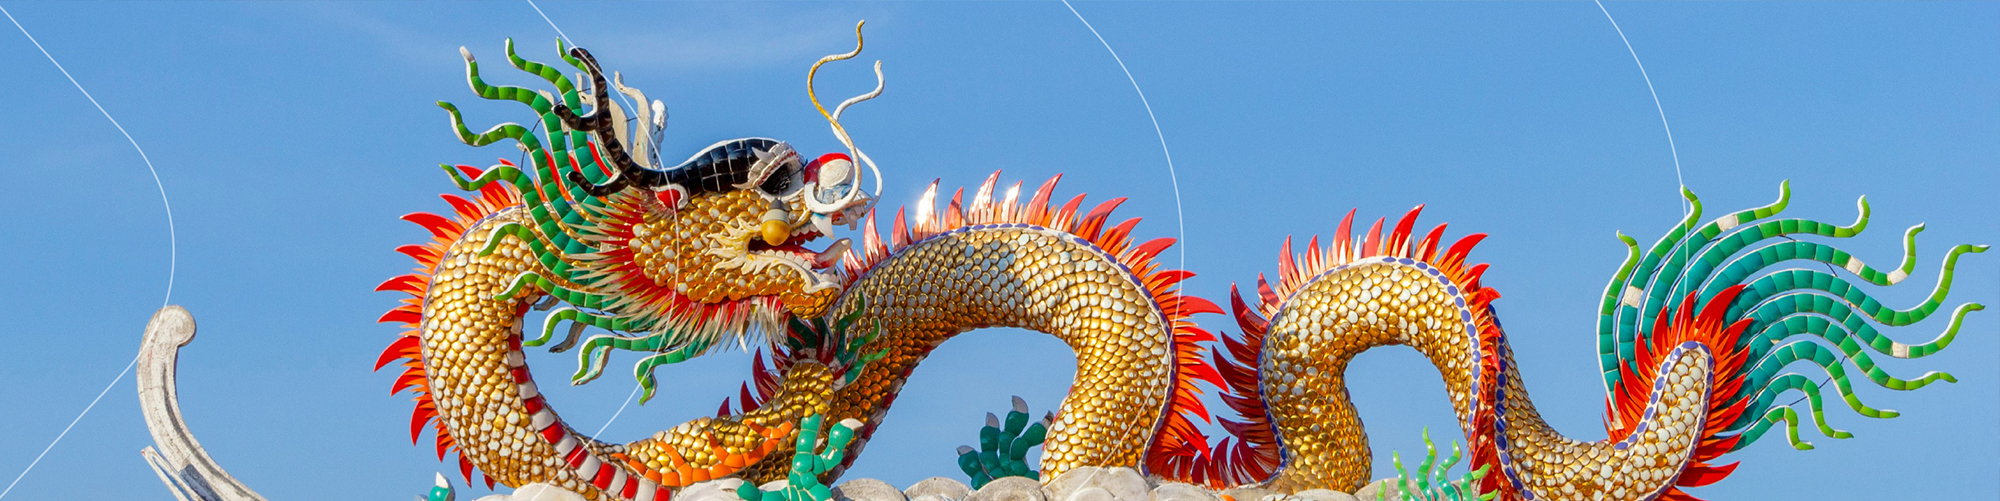 Amadeus Data Reveals Jinghong to be the Top Hotel Destination for Chinese New Year